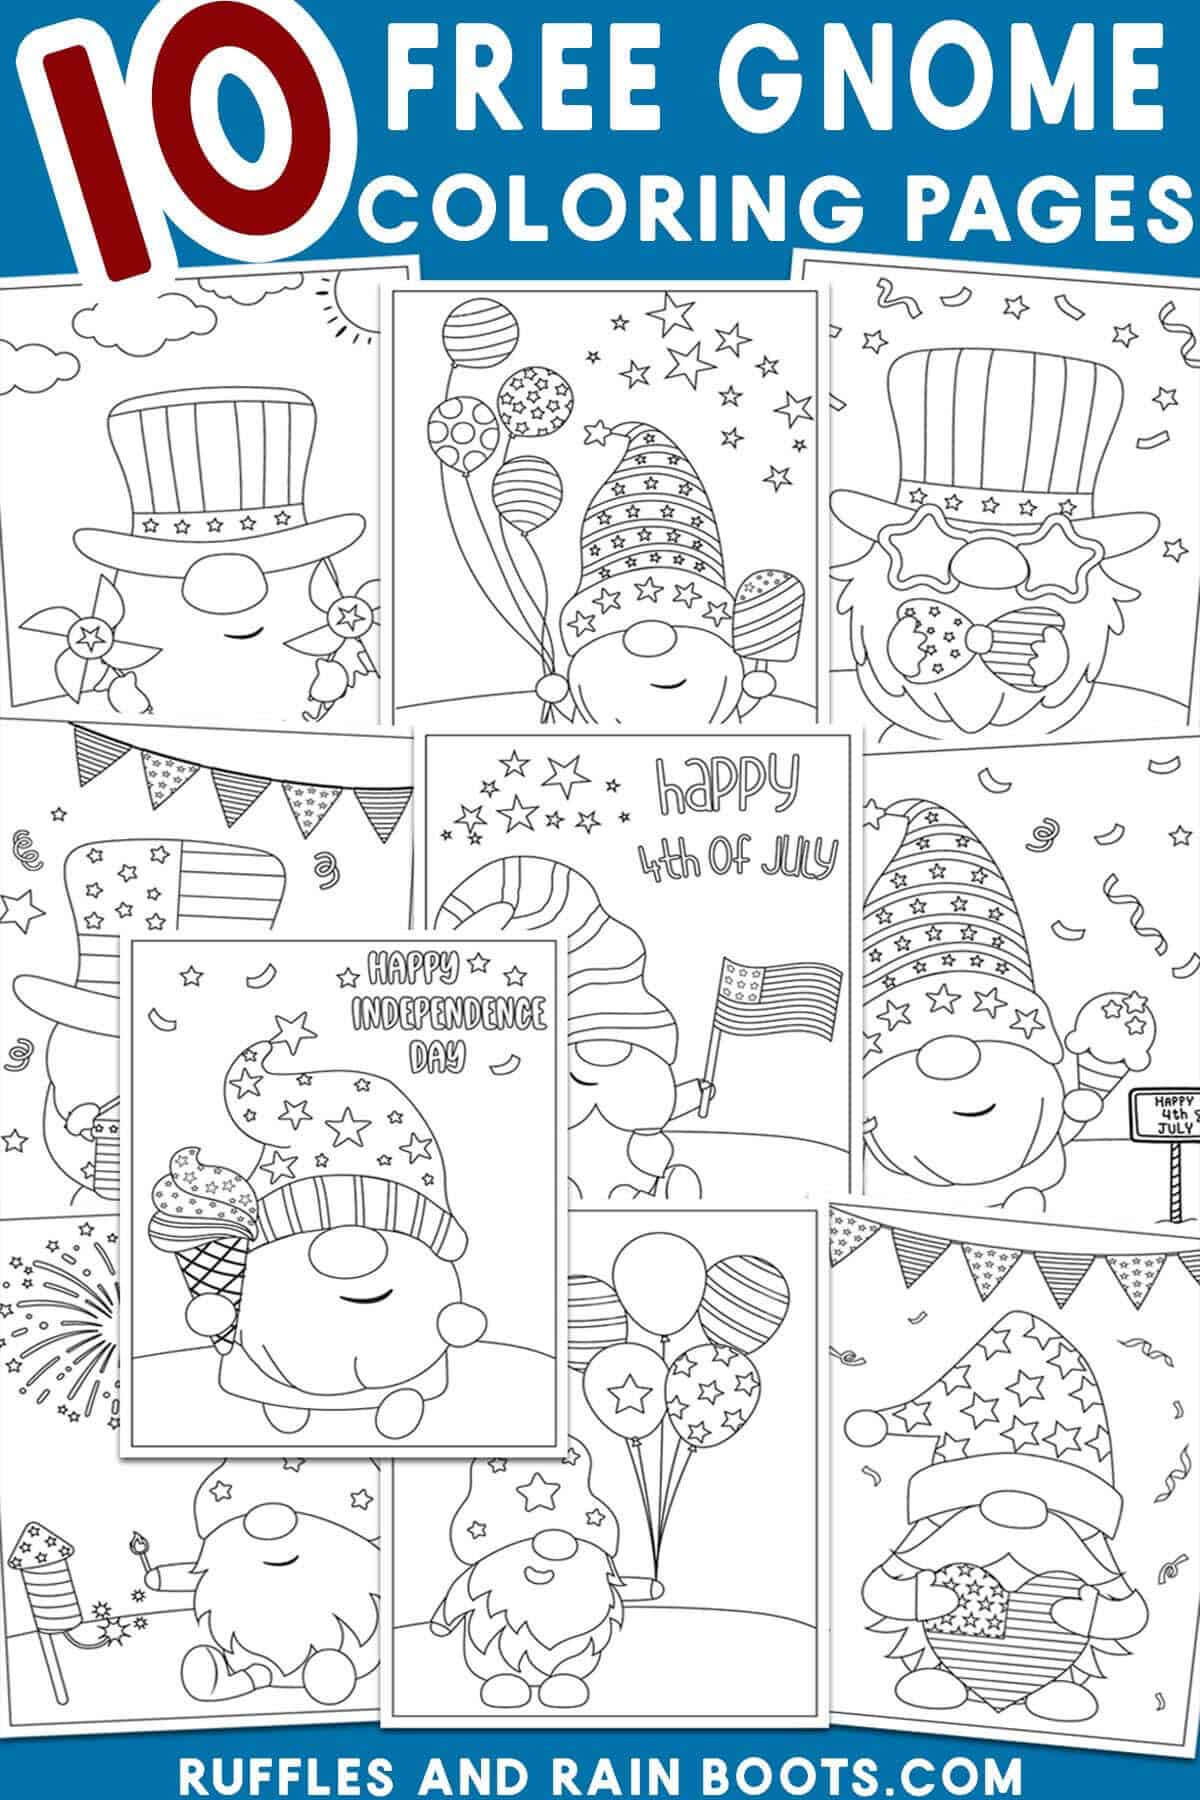 Vertical image of 10 pages of free gnome coloring sheets with text which reads 10 Free Gnome Coloring Pages.